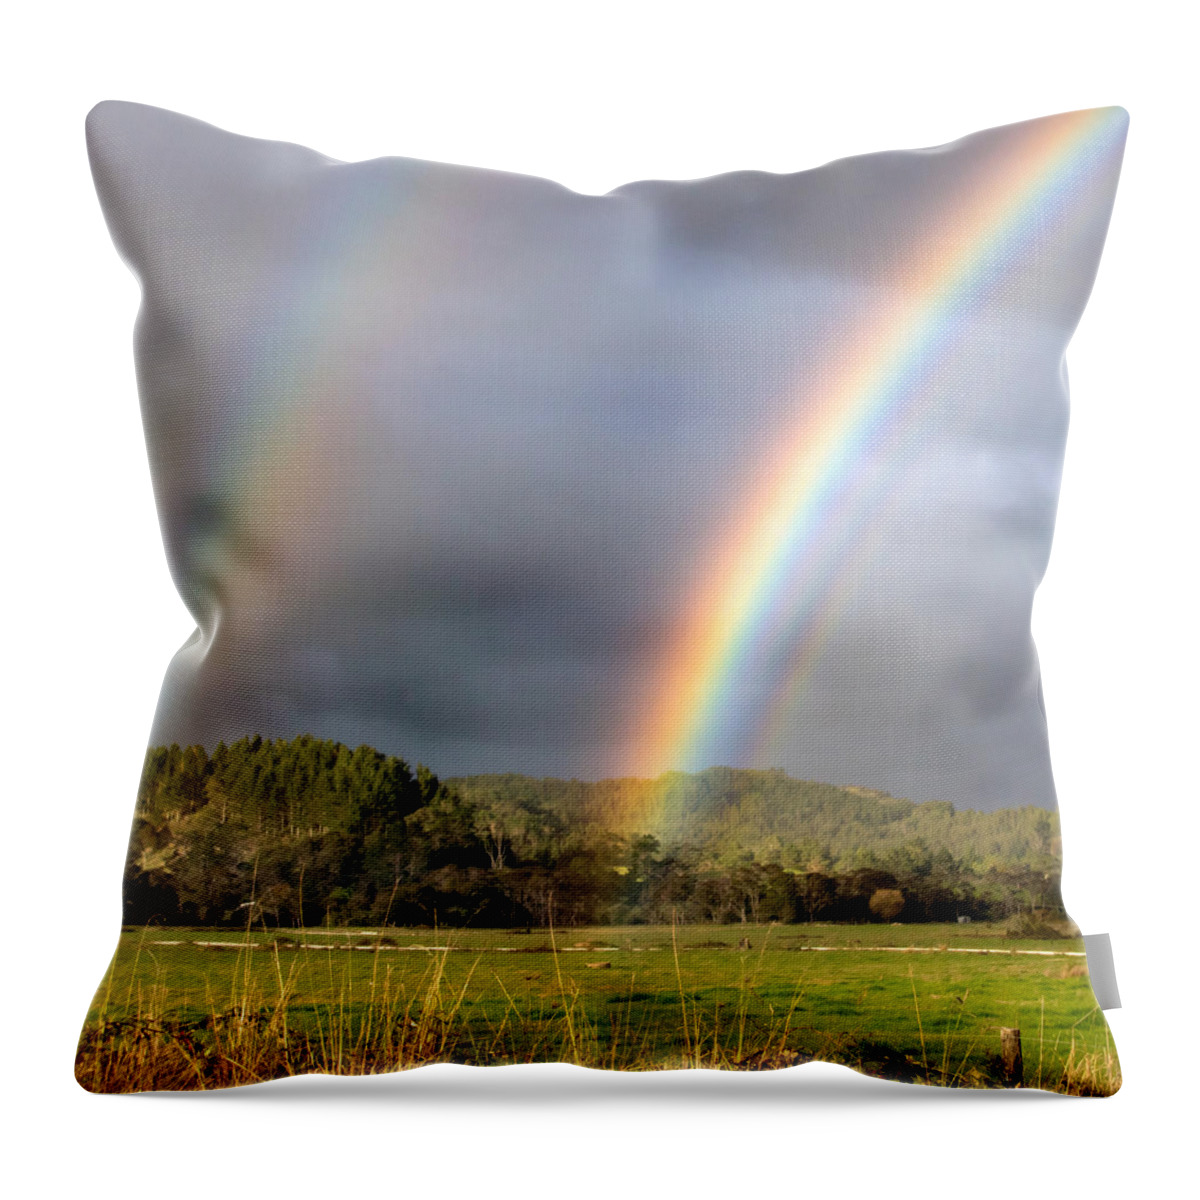 Triple Throw Pillow featuring the photograph Triple Promise by Nicholas Blackwell